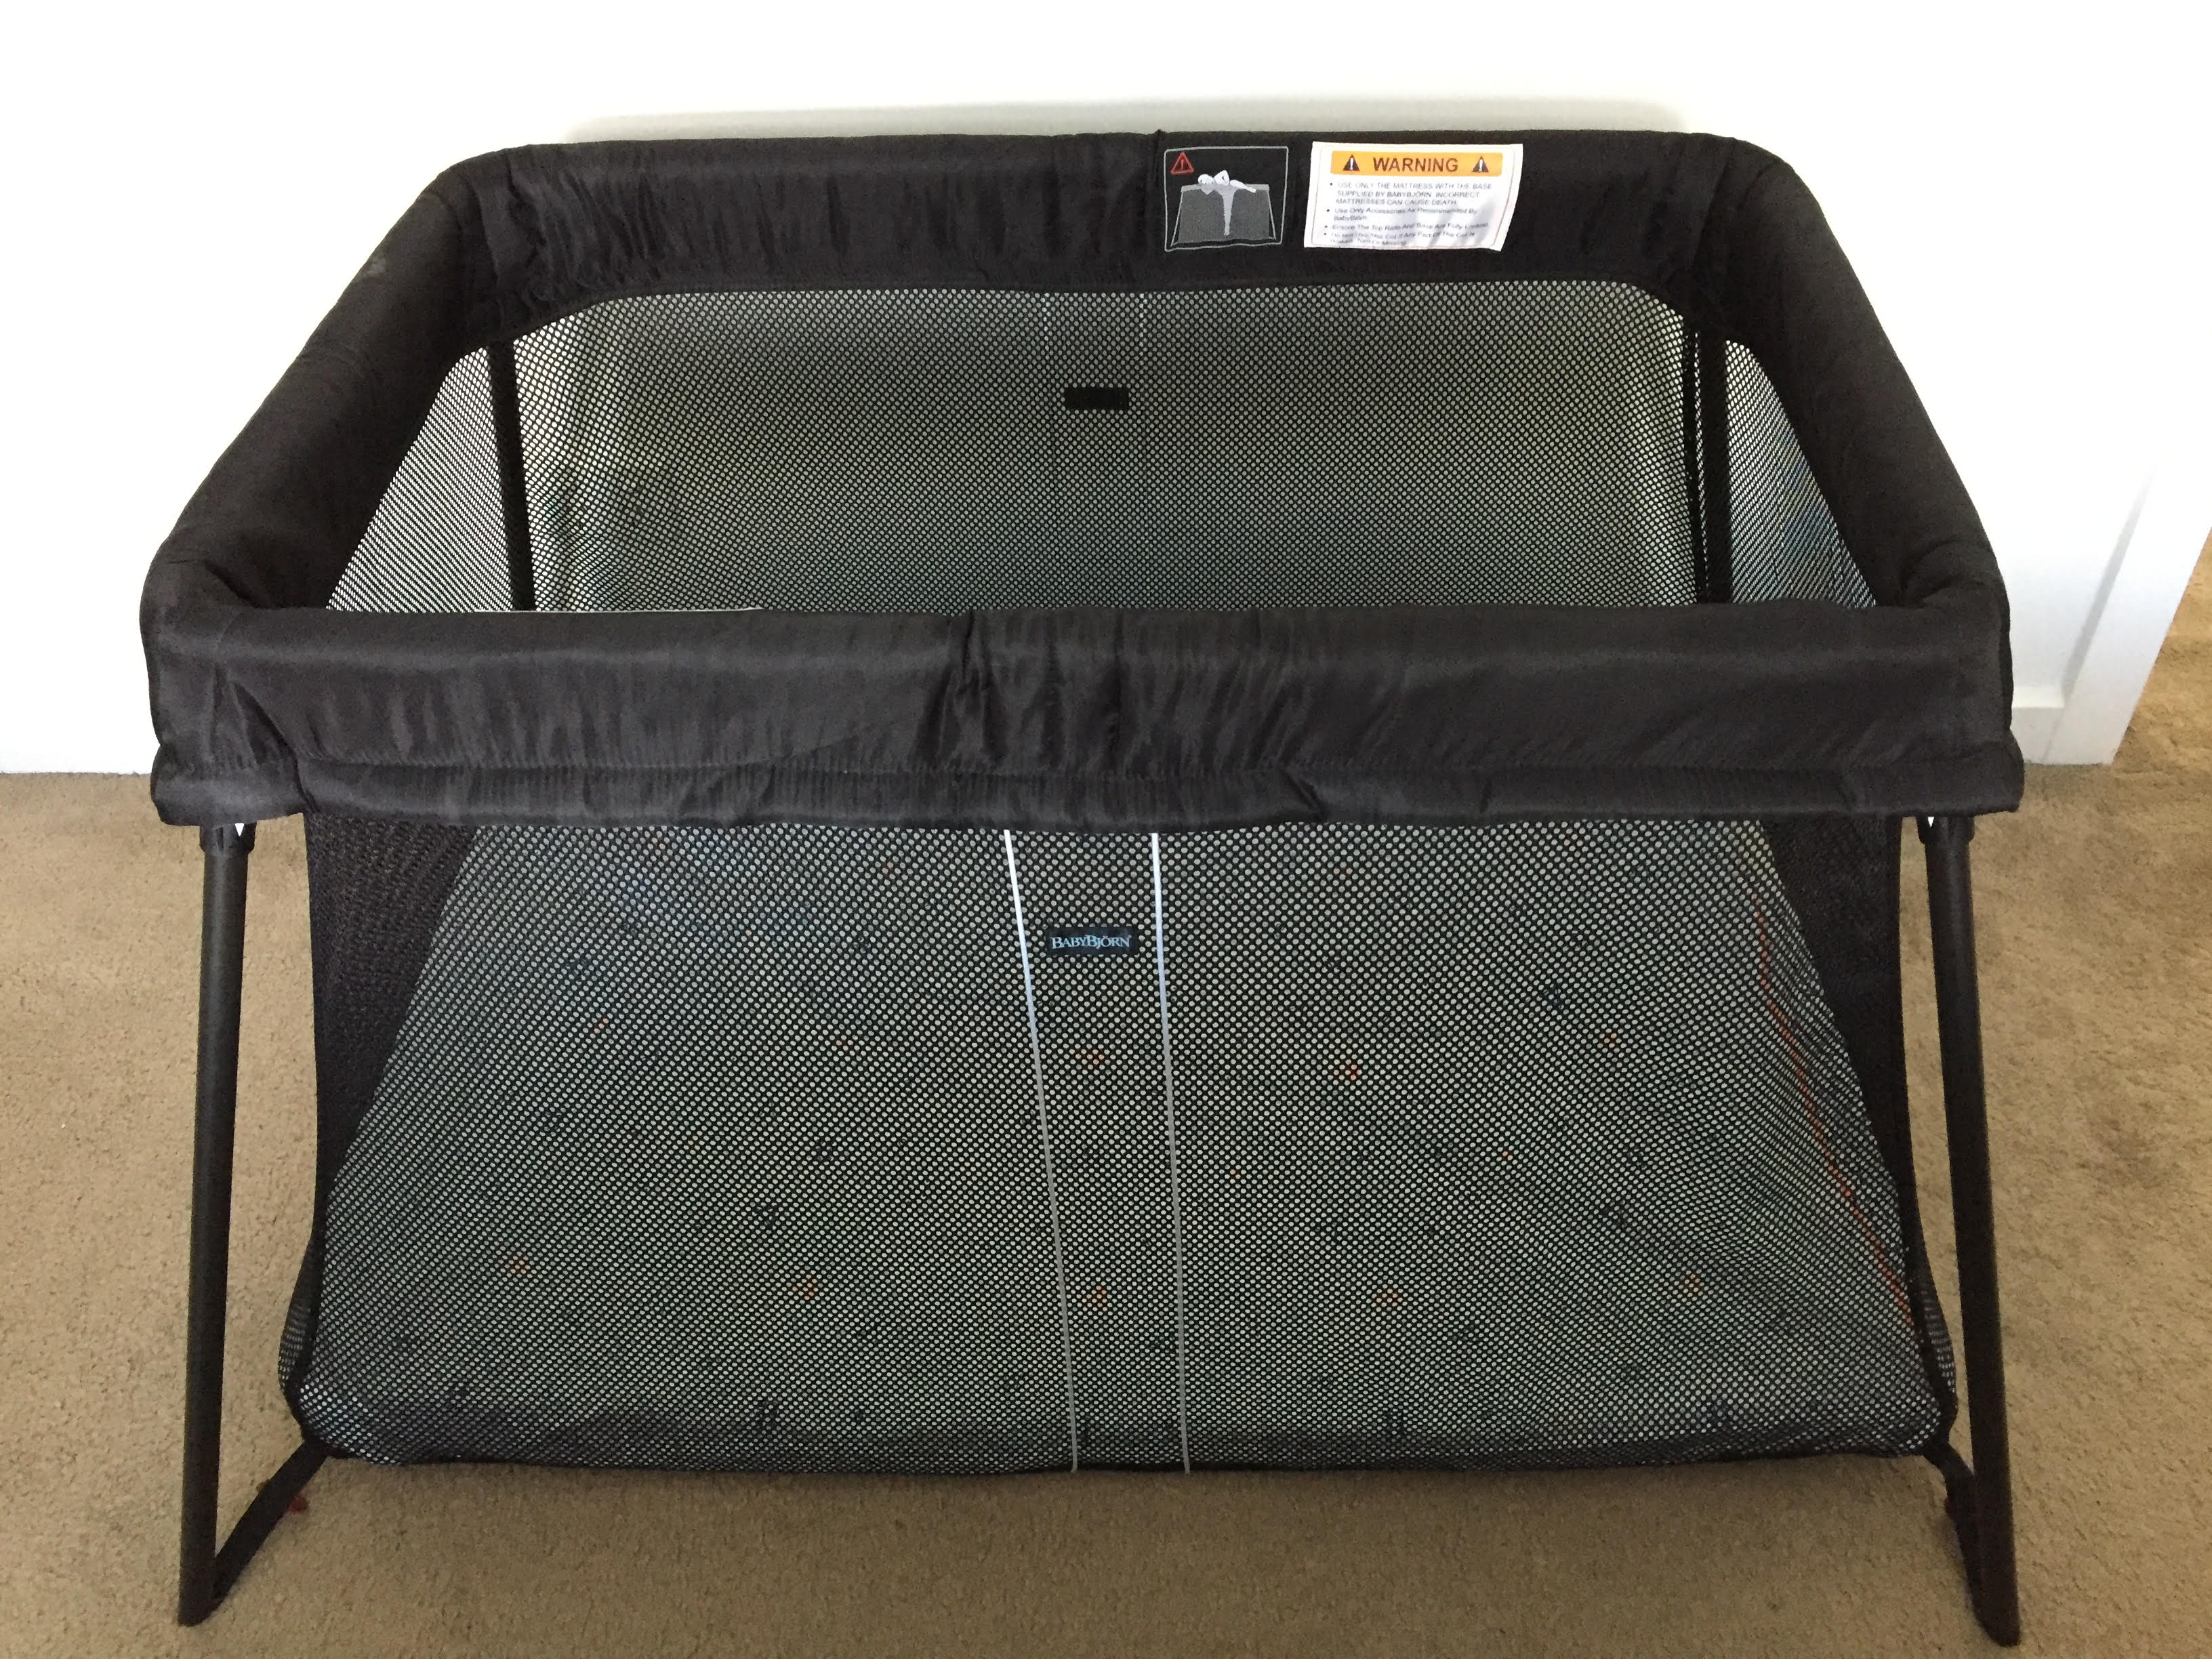 babybjorn travel cot assembly